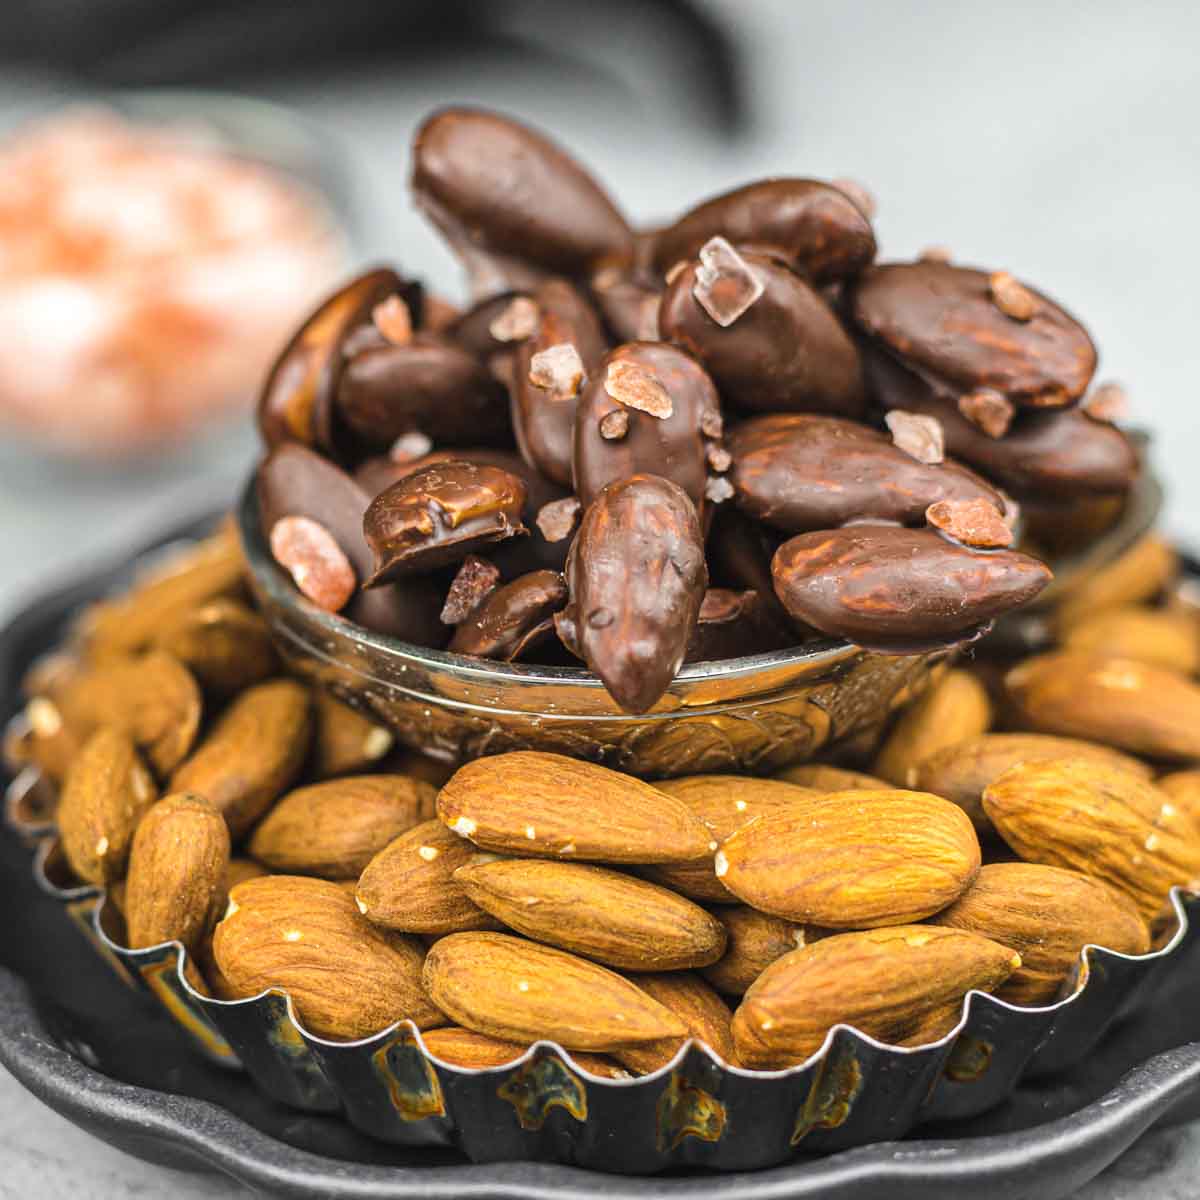 A plate of chocolate covered almonds on a black plate.